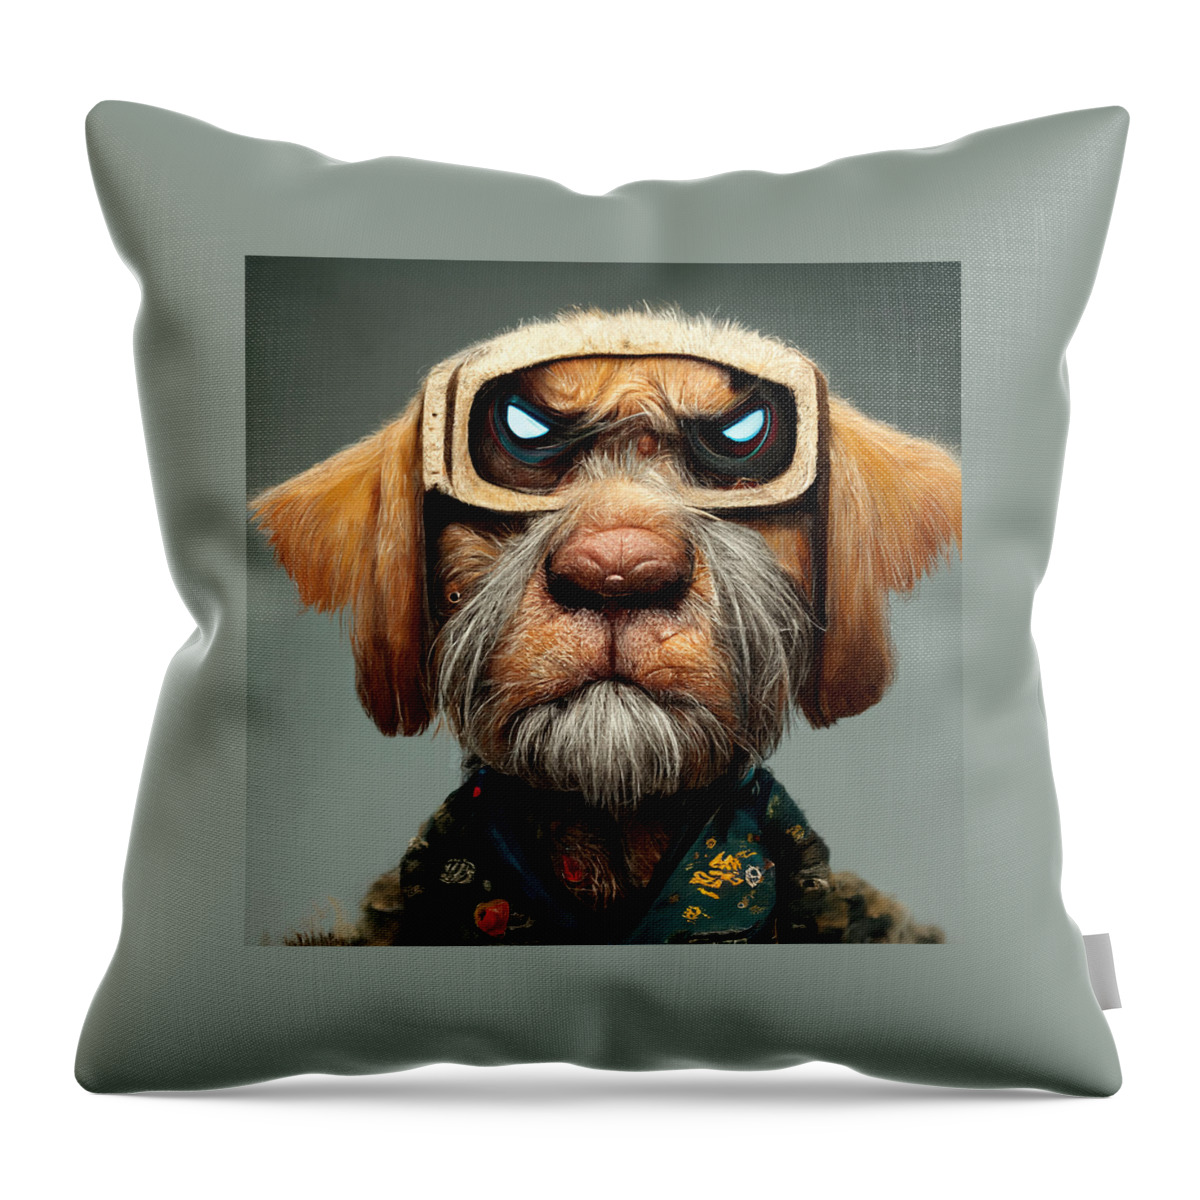 Cool Cartoon Old Warrior As A Dog  Realistic 6241641a 1b41 4aa6 B1ec E8a4615e4bed Throw Pillow featuring the painting Cool Cartoon Old Warrior As A Dog  Realistic 6241641a 1b41 4aa6 B1ec E8a4615e4bed by MotionAge Designs